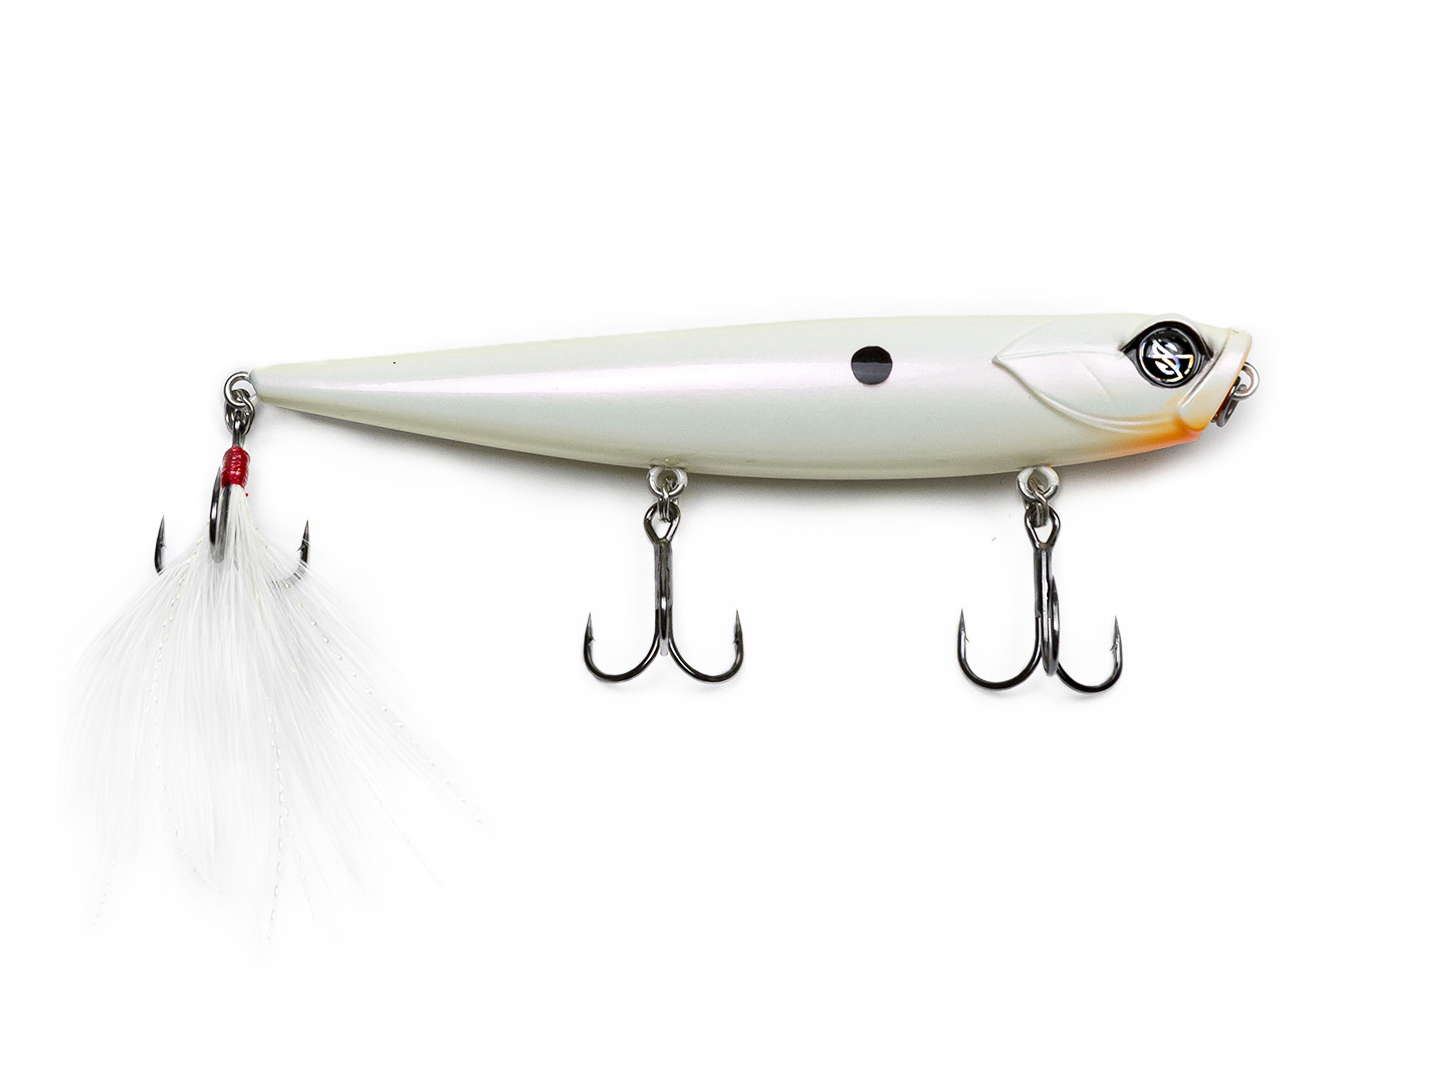 Googan Squad Revolver - Topwater Bait - (Shattered Shad), Topwater